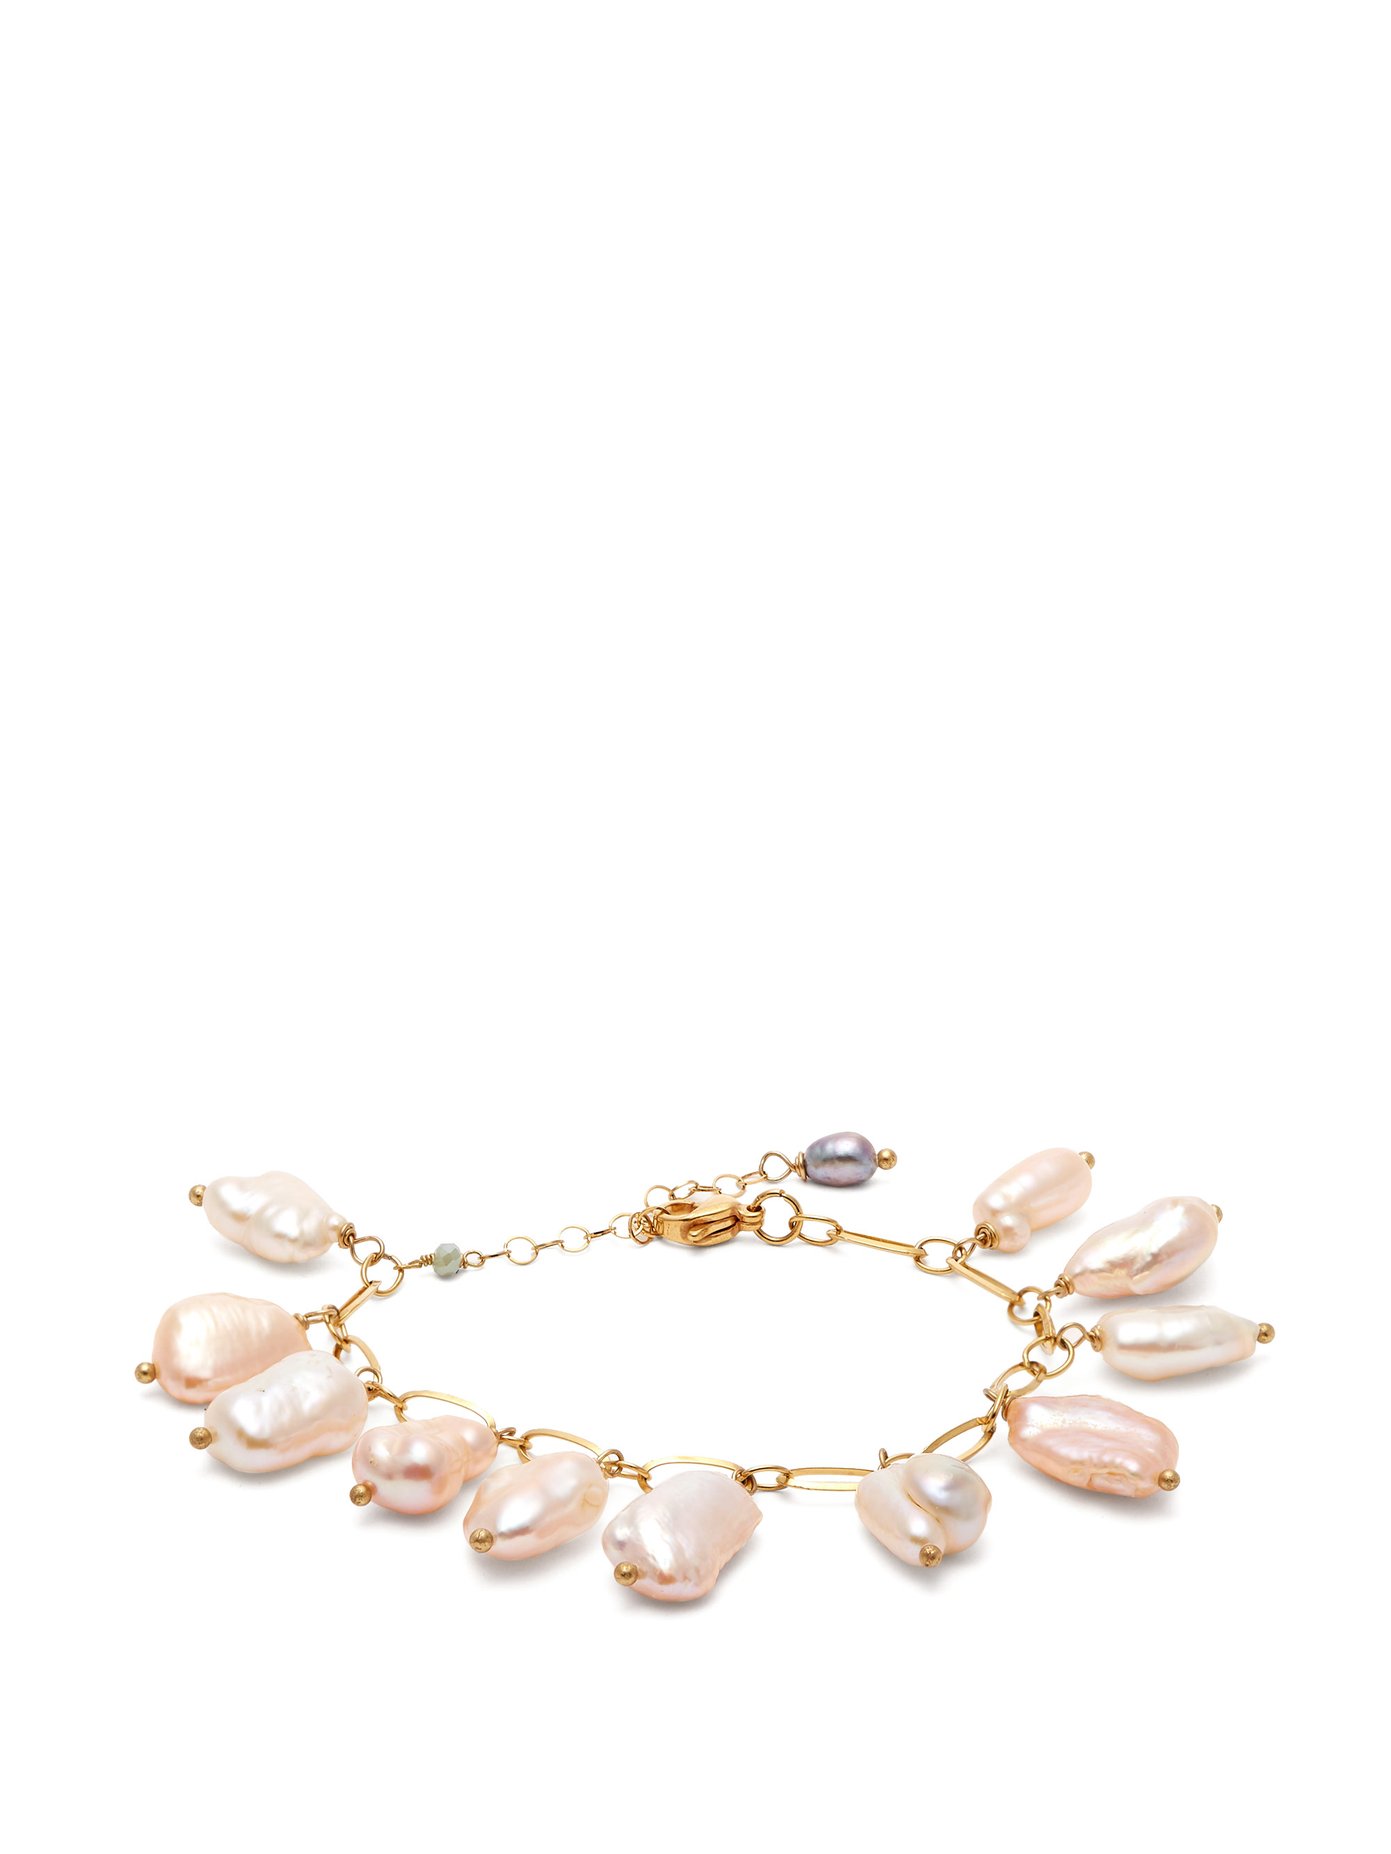 where to buy pearl bracelets